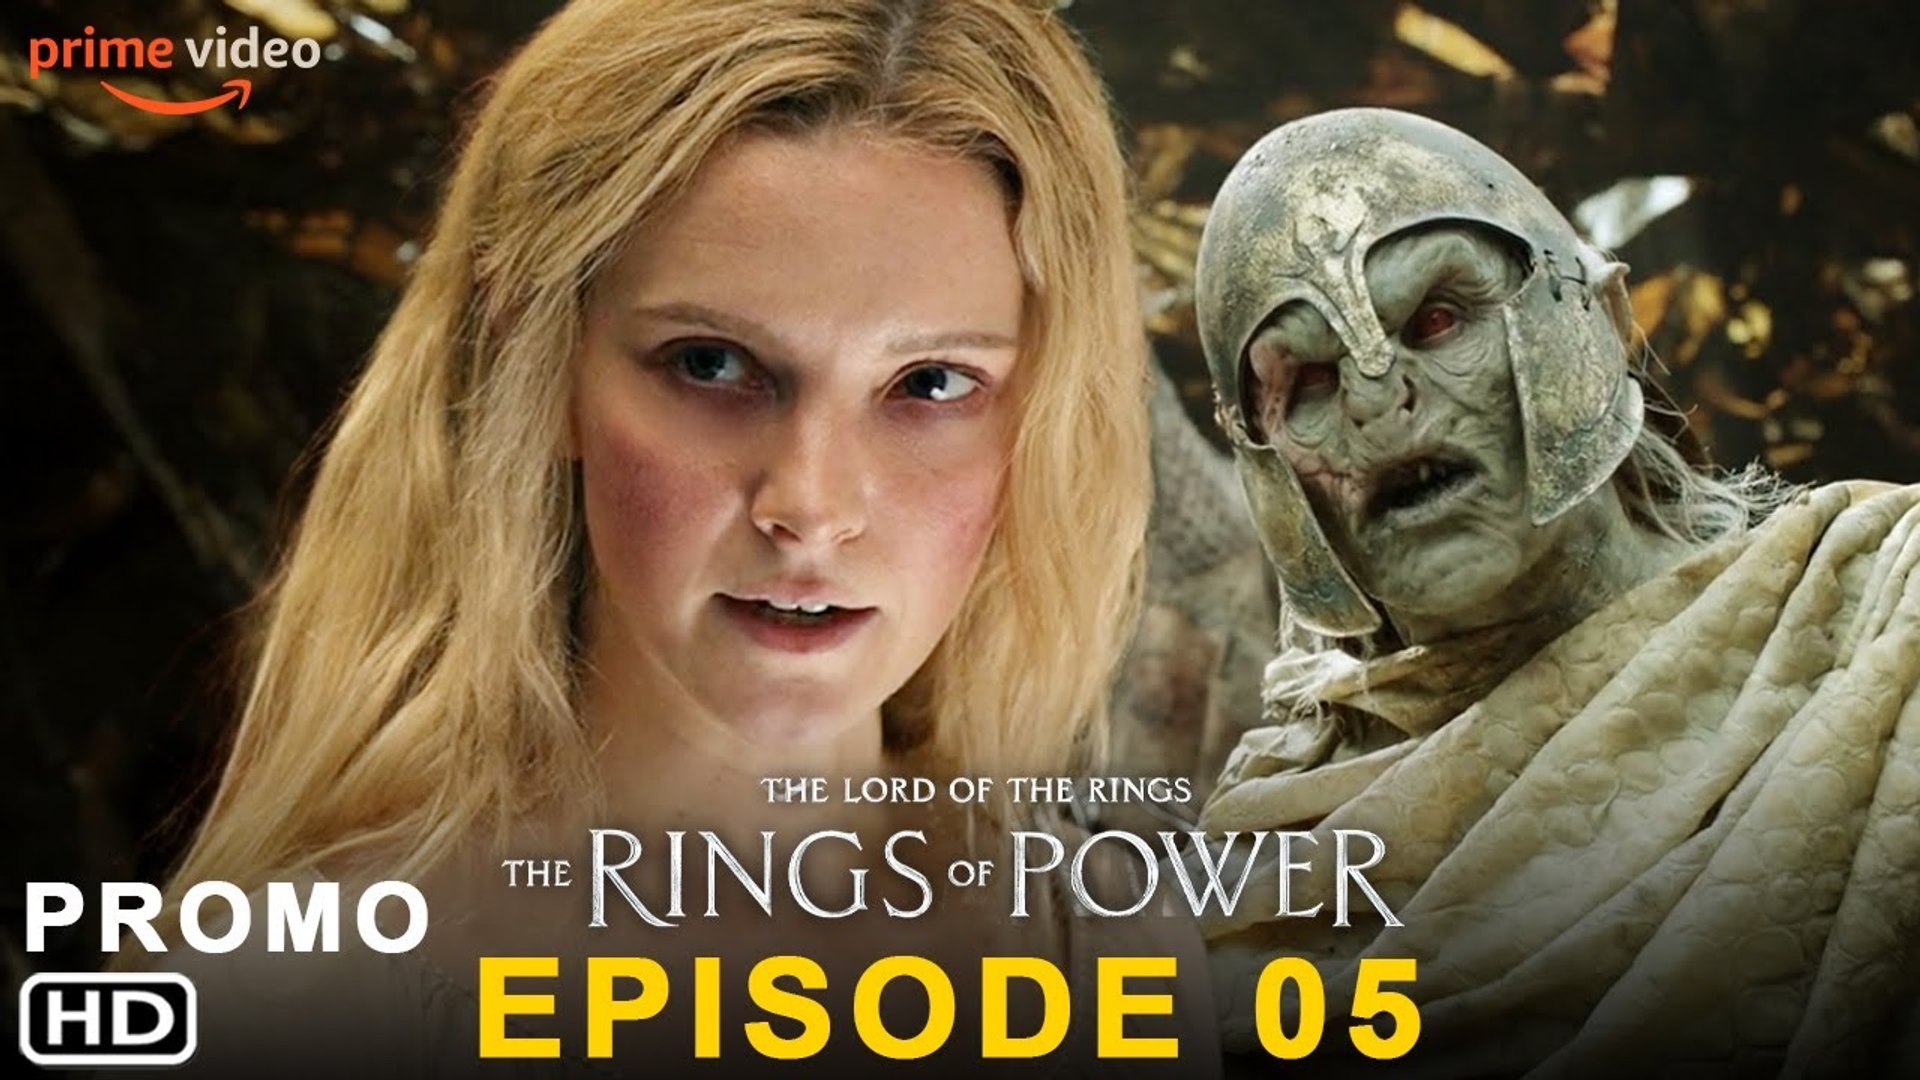 The Lord Of The Rings: The Rings Of Power Official Prime Video